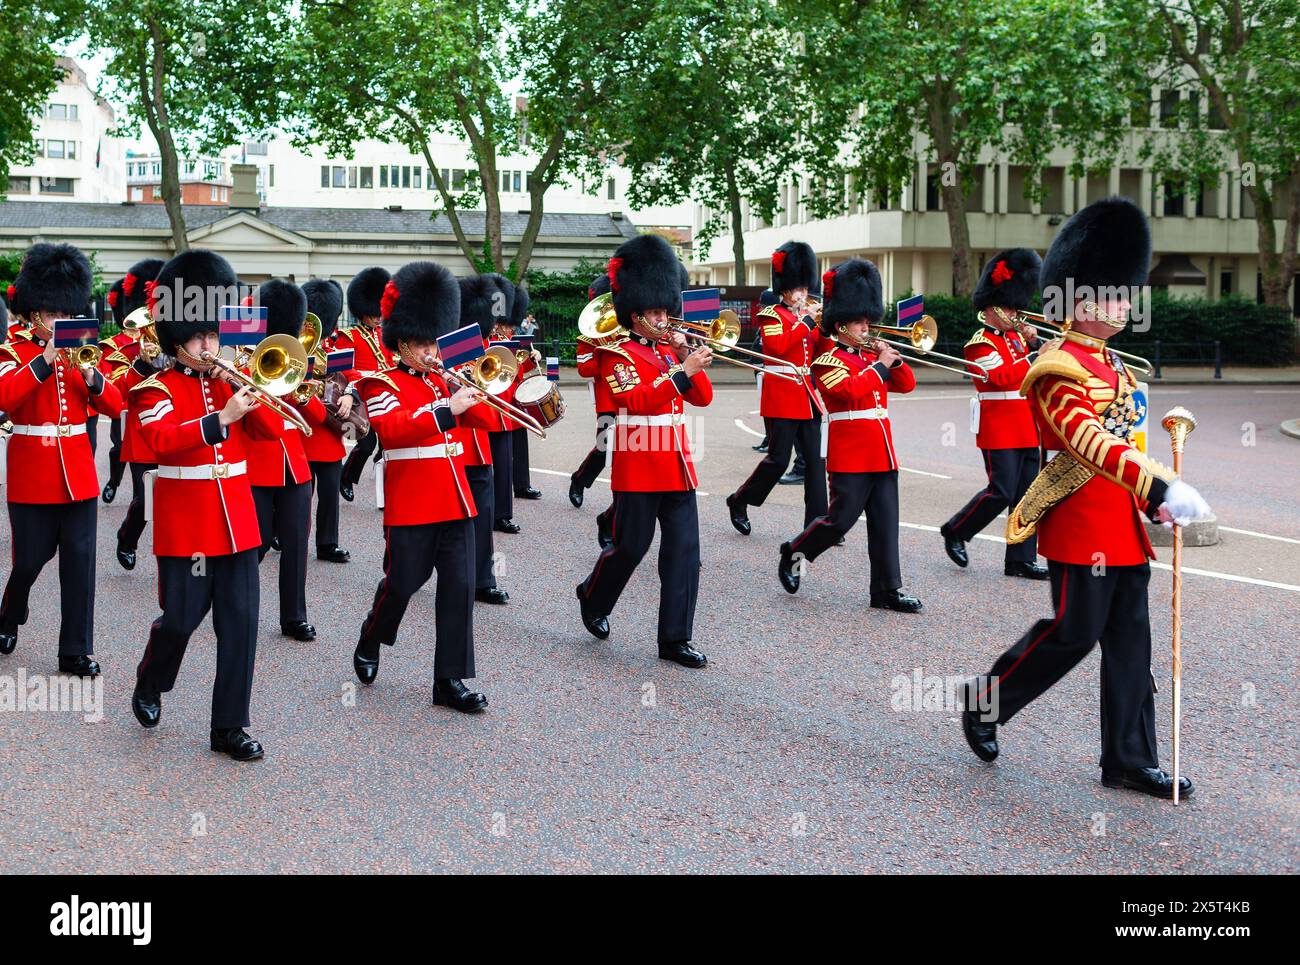 London, United Kingdom - June 30, 2010 : Band of the Queen's Guards marching towards Buckingham Palace. Stock Photo